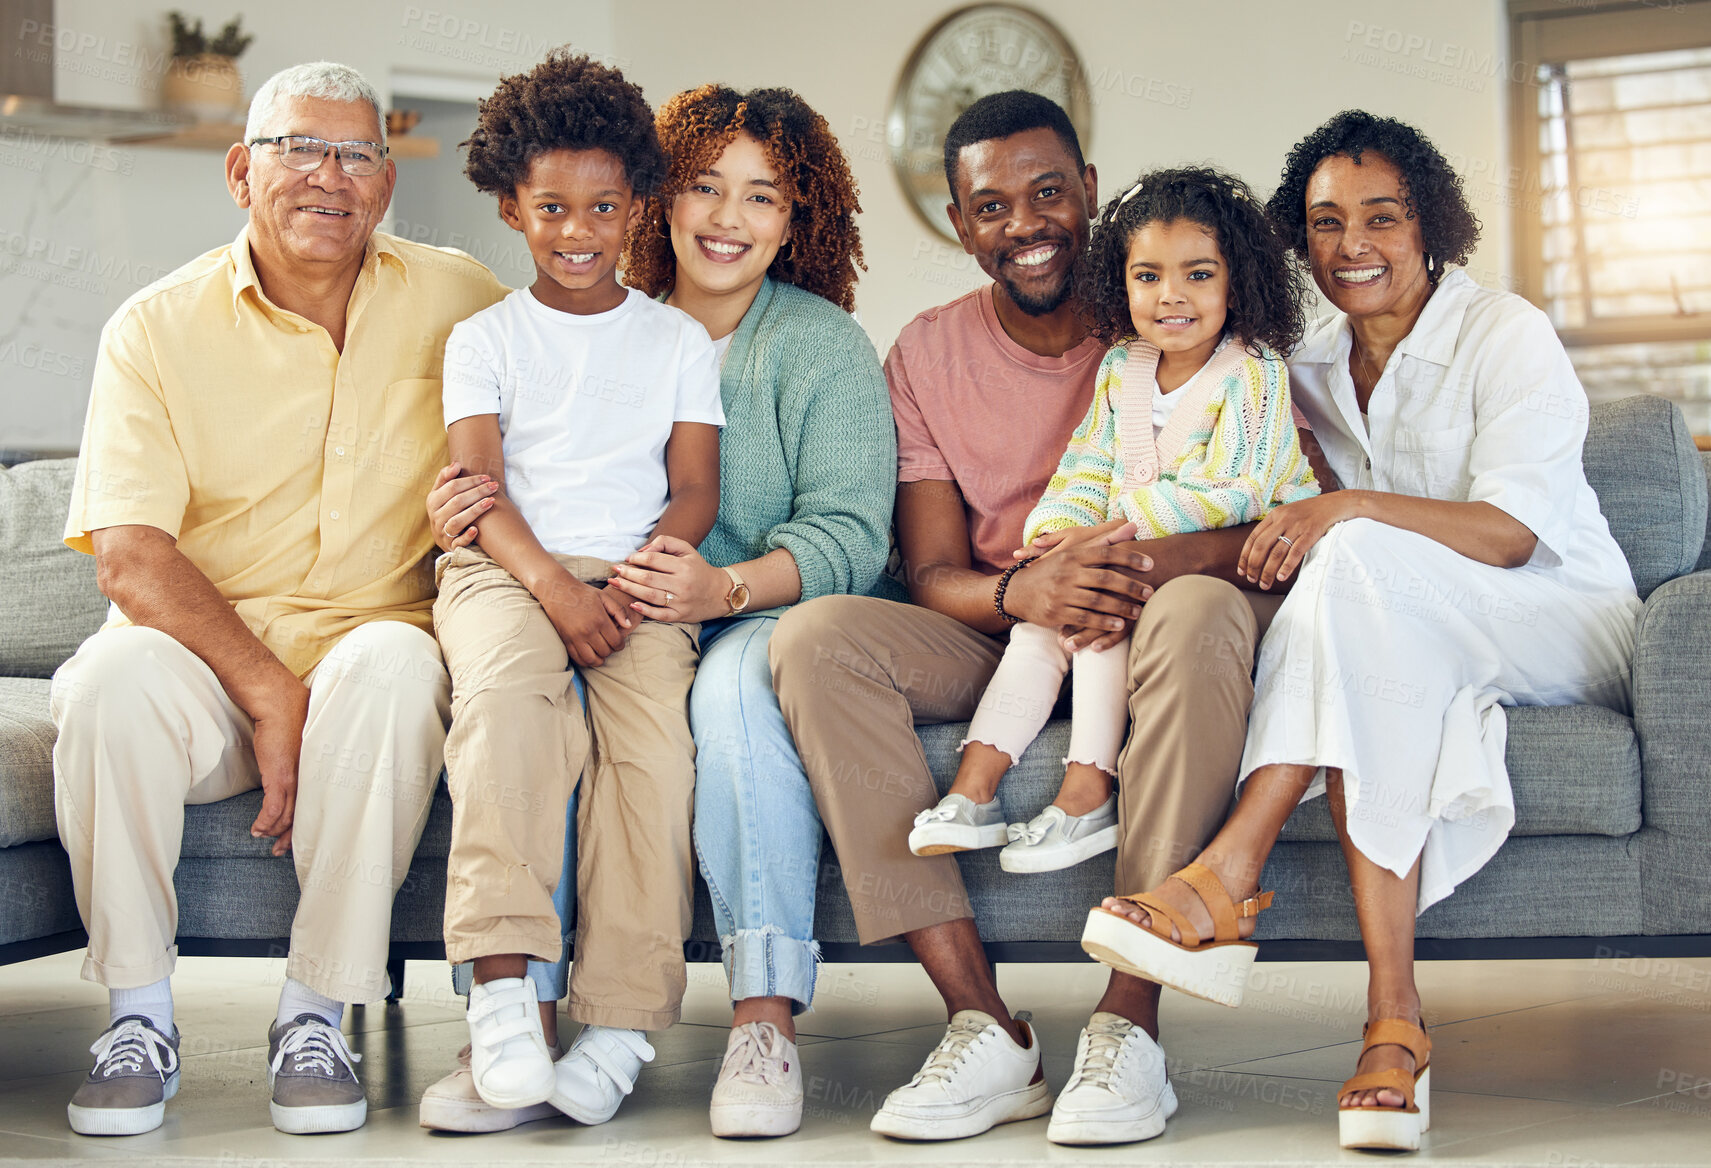 Buy stock photo Family portrait, generations and love with trust and support at home, grandparents and parents with kids. Relax in living room, happy people together with unity and bonding, diversity and care